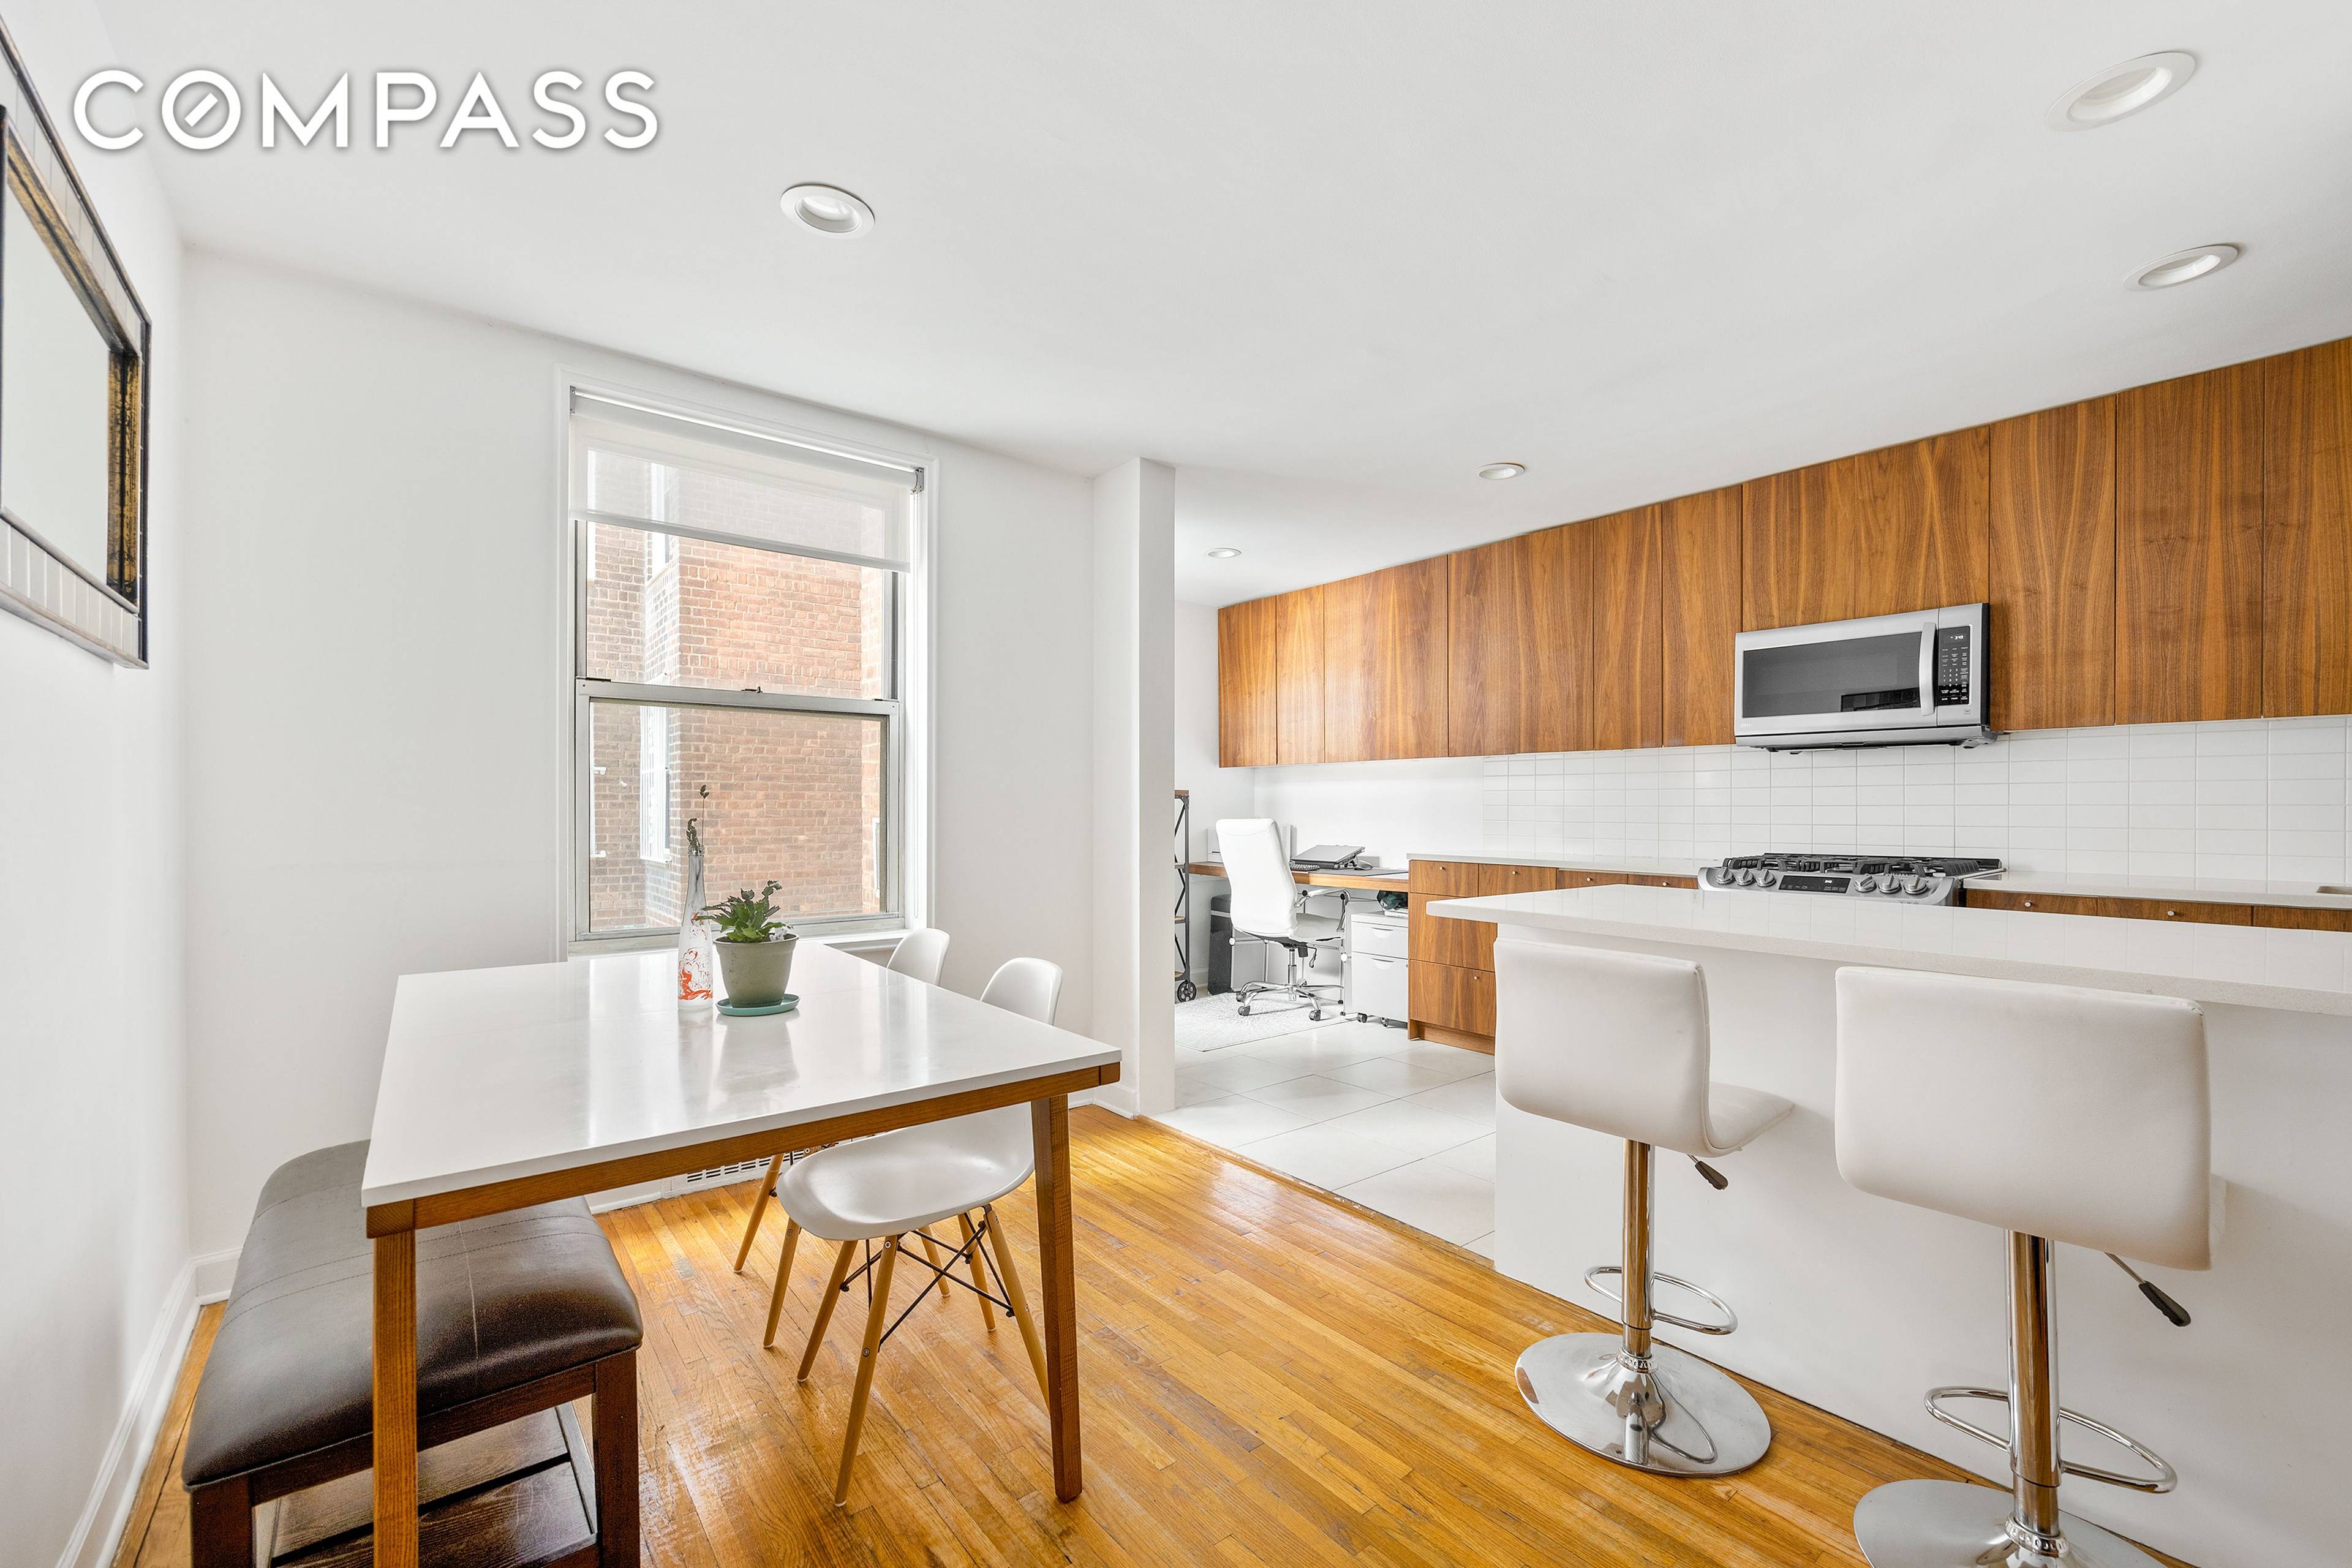 A detailed, high end renovation awaits in oversized 2BR 1BA with almost 500 sq.